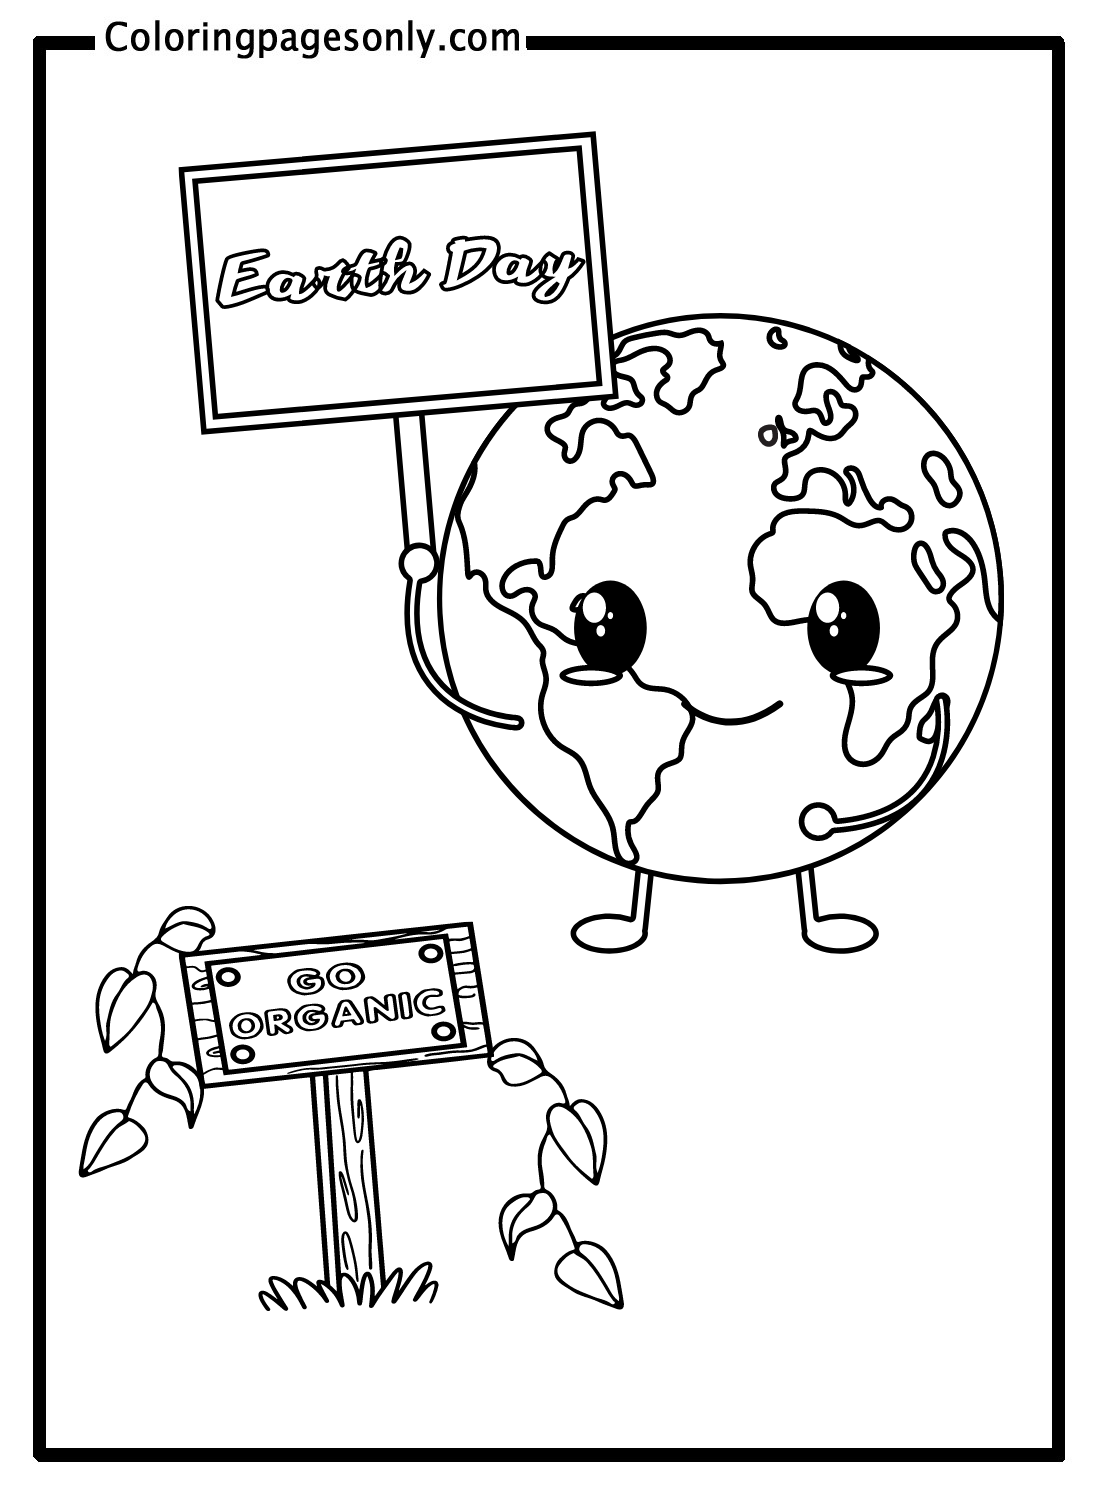 Earth Day Go Organic For Kids Coloring Pages